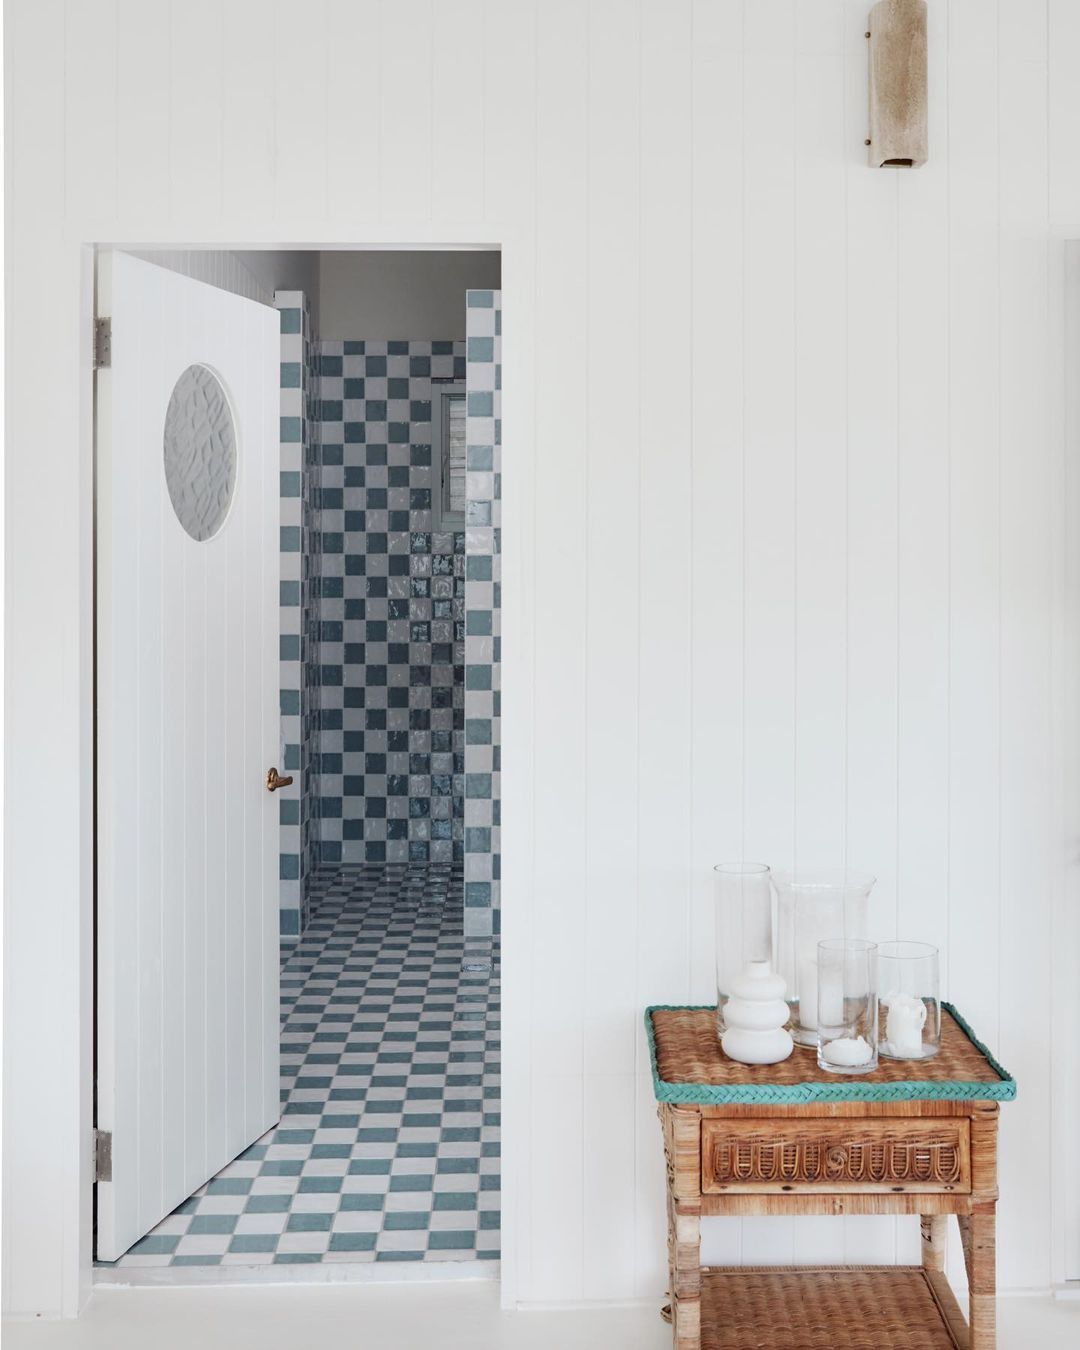 tiles run from floor to shower in a bathroom at sunny corner, a riverfront rent 21